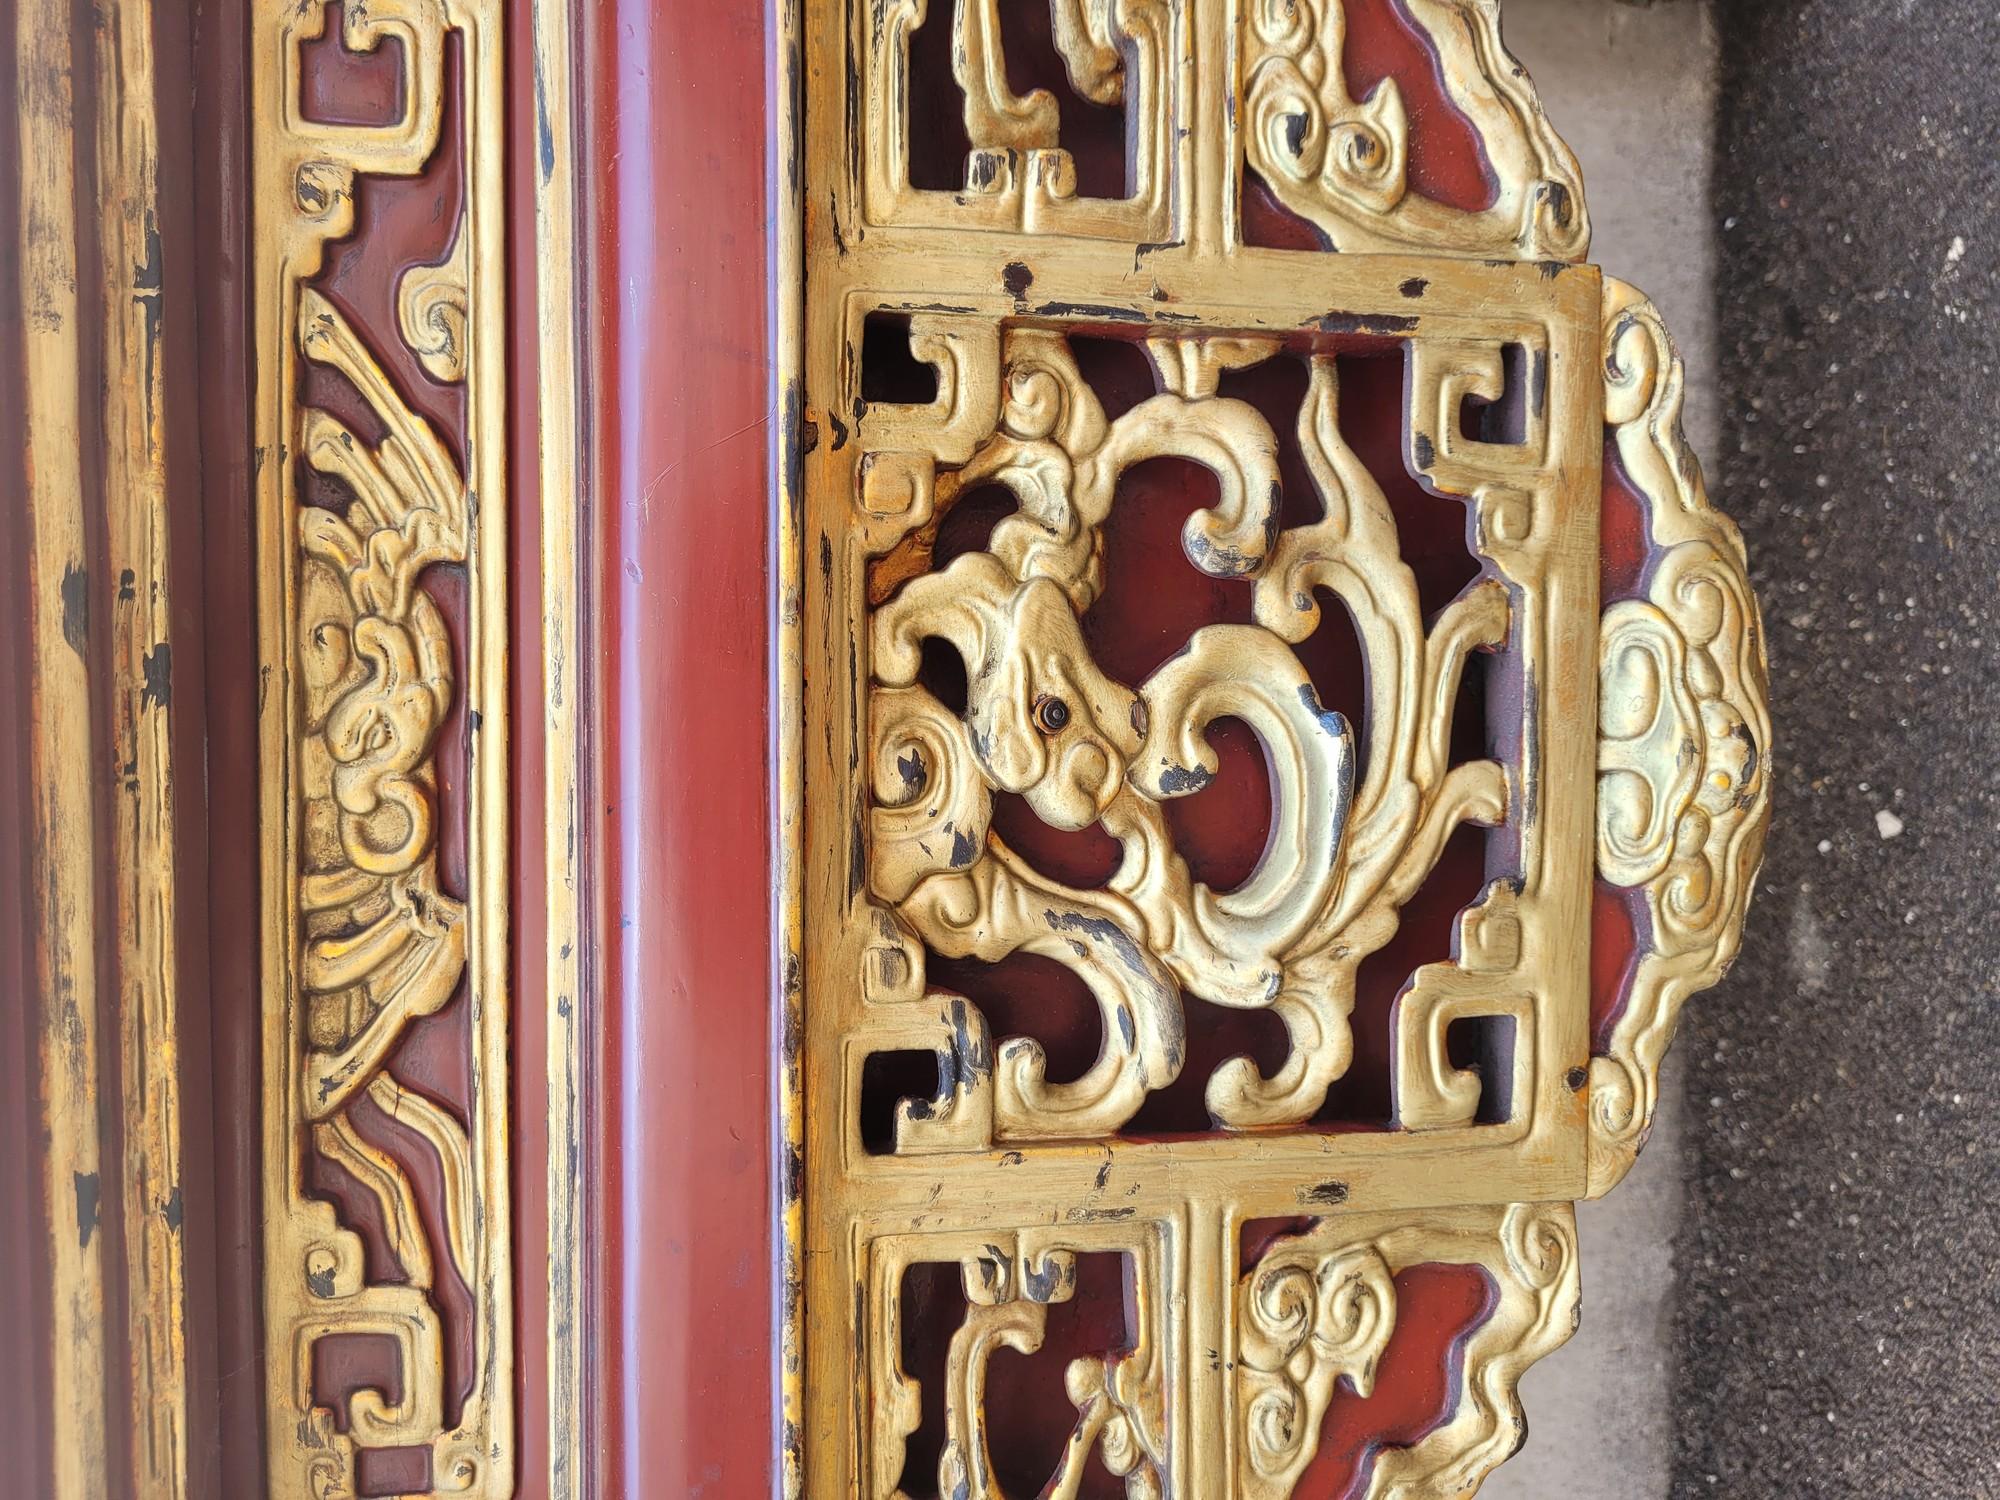 Large console in carved and red and gold lacquered wood, has to be plave in the center of a room, but with a different pattern for the front and back.

The feet have been re-entered, lacquer lifts on the top

Chinese work from the 19th